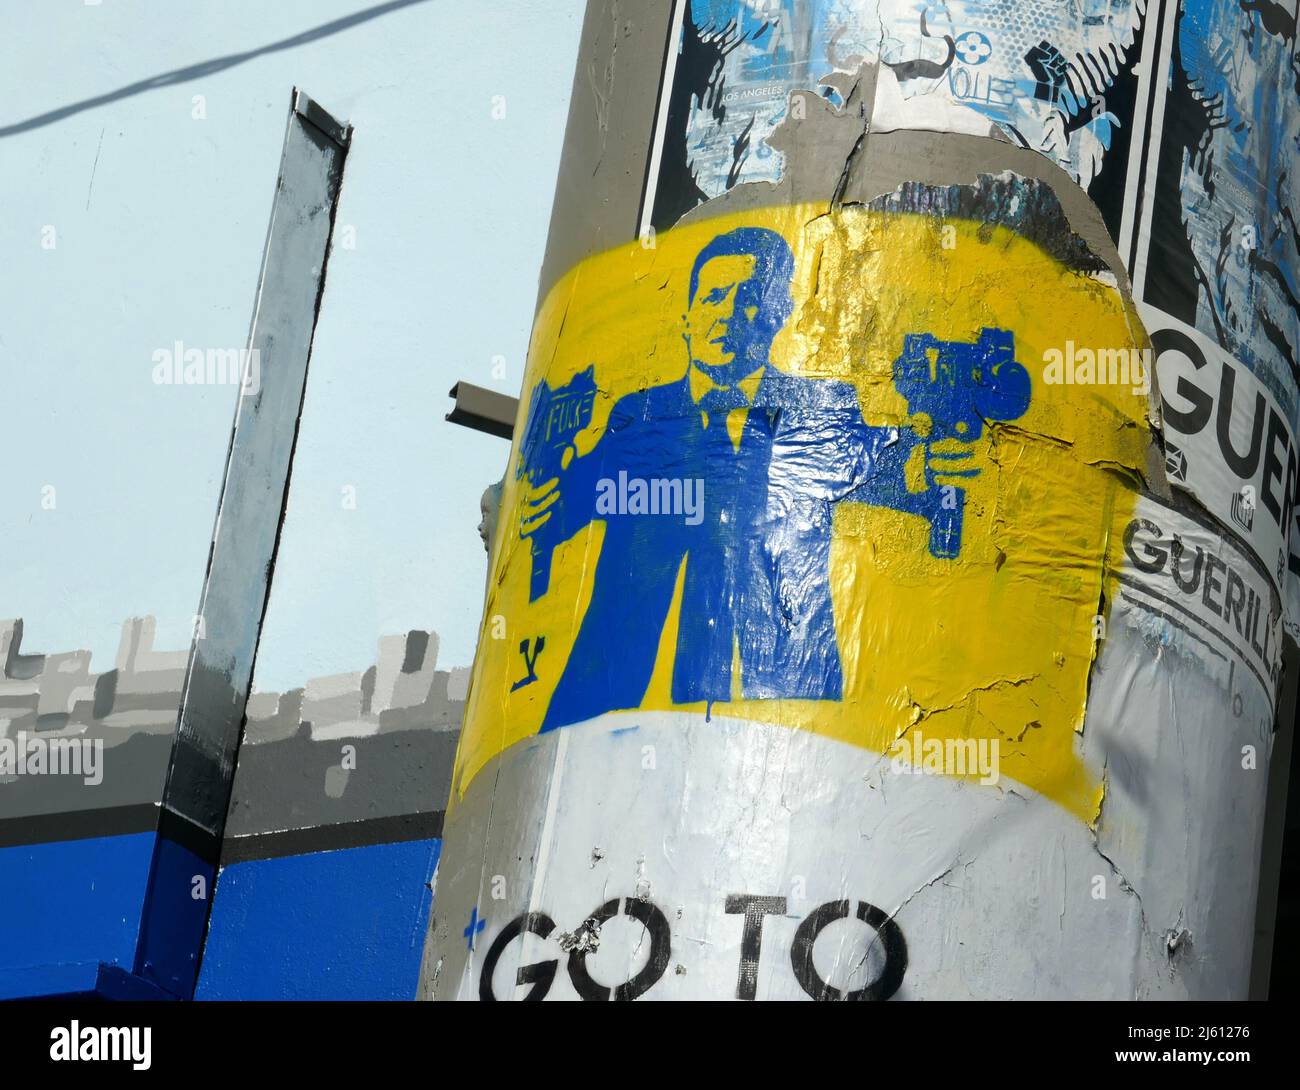 Los Angeles, California, USA 26th April 2022 A General view of atmosphere of Volodymyr Zelenskyy Street Art Mural with Ukranian Flag Colors on Melrose Avenue on April 26, 2022 in Los Angeles, California, USA. Photo by Barry King/Alamy Live News Stock Photo